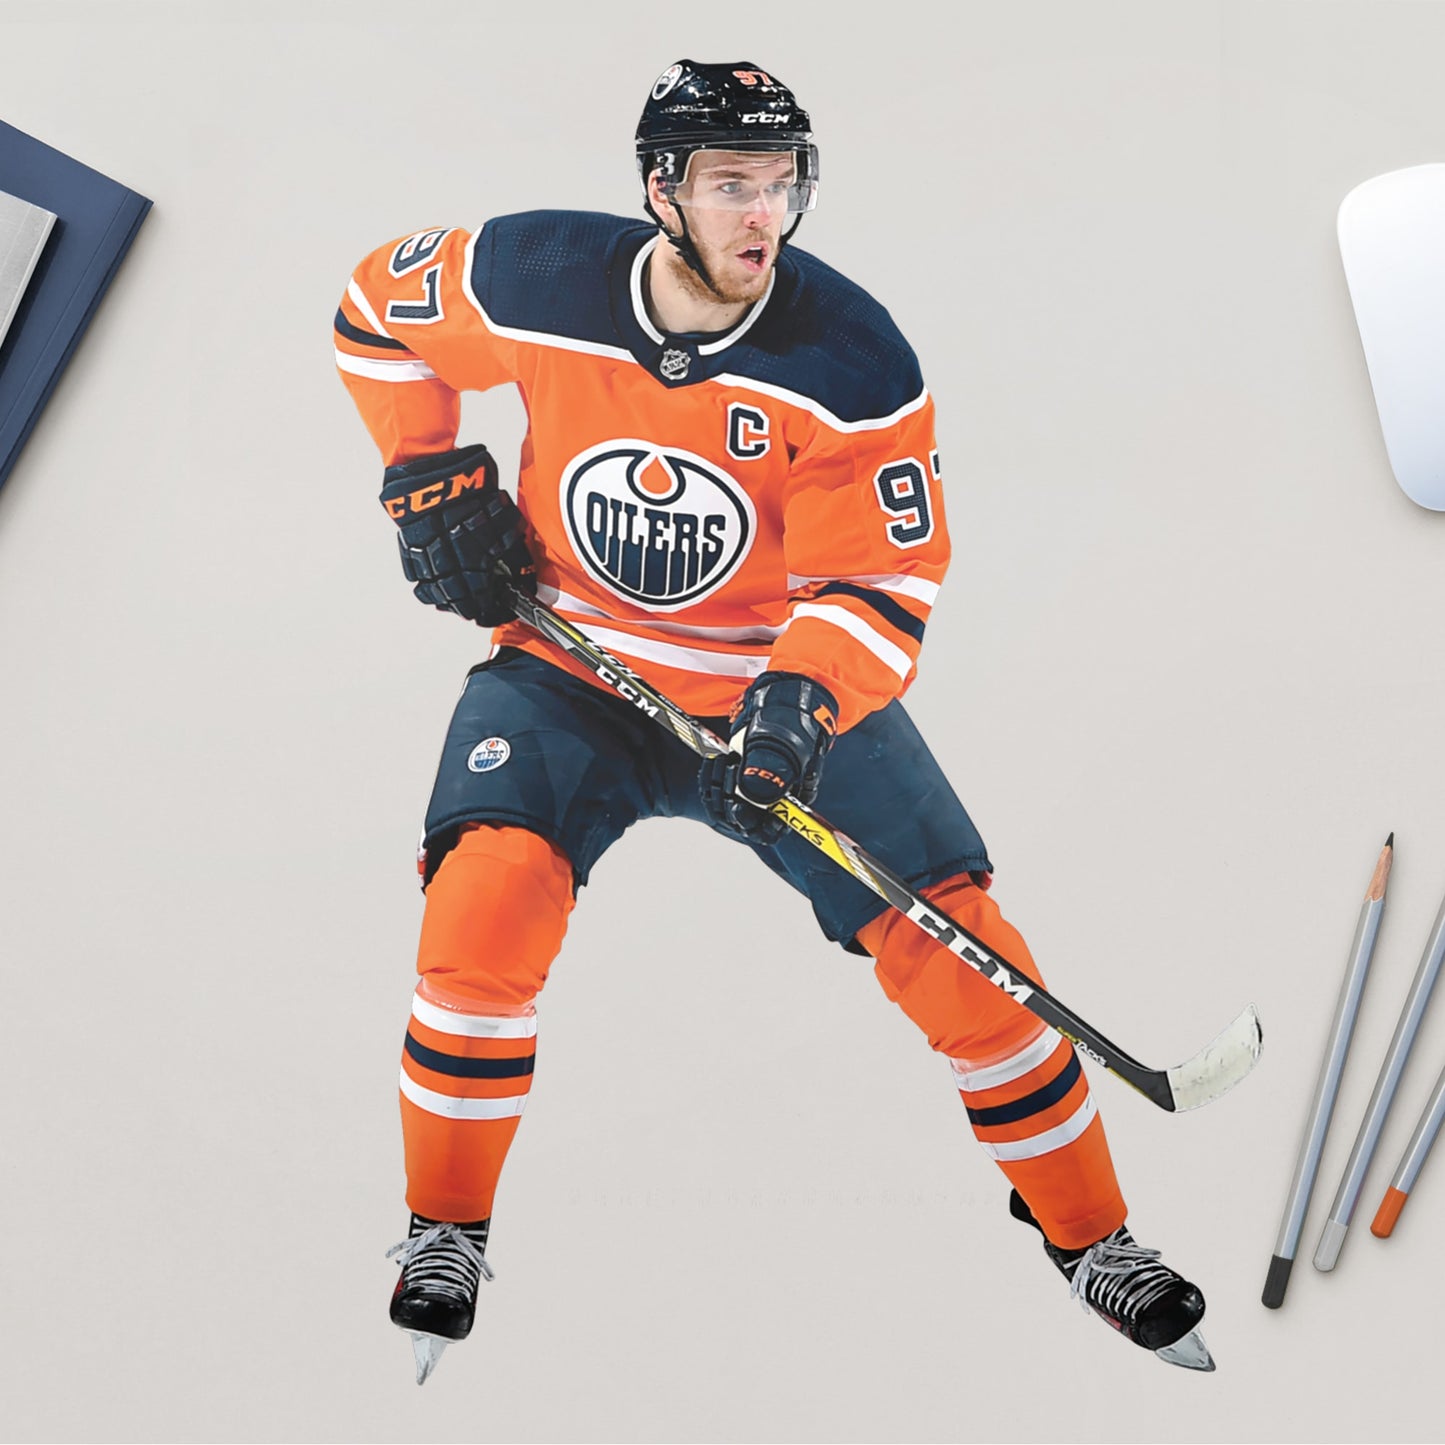 You can't always make it to Rogers Place in person, but now you can bring the action on the ice to life in your own home with this Officially Licensed NHL removable wall decal of the Oilers' very own Connor McDavid! Widely considered to be one of the best players in the league, this decal of the beloved Oilers captain is sure to bring some excitement to your bedroom, office, or fan room.